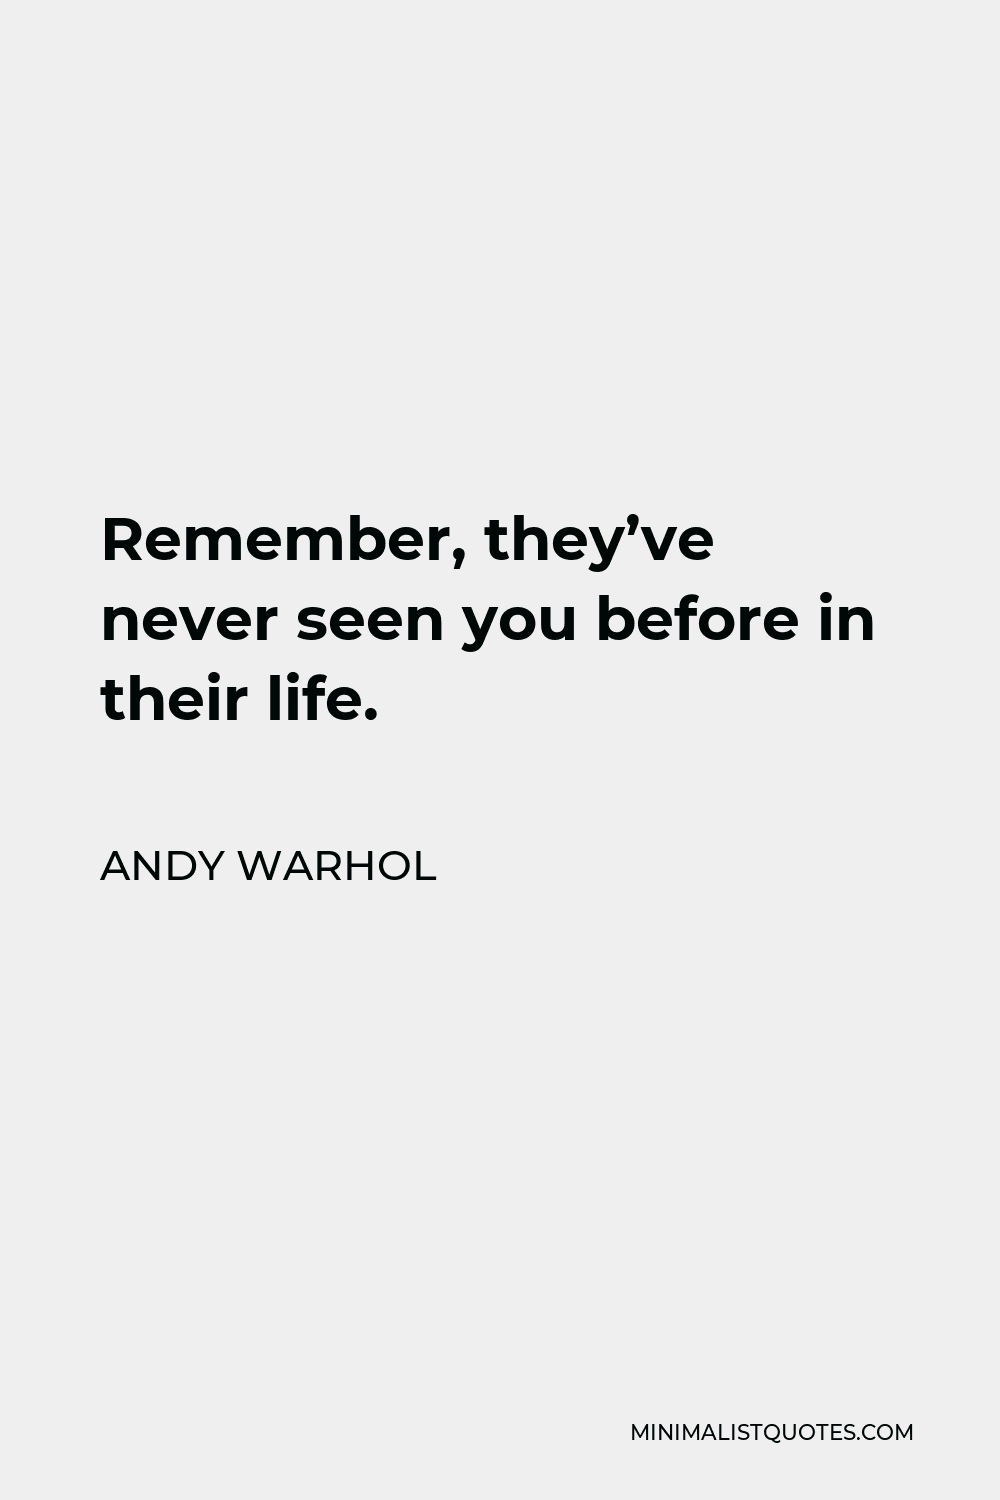 Andy Warhol Quote - Remember, they’ve never seen you before in their life.